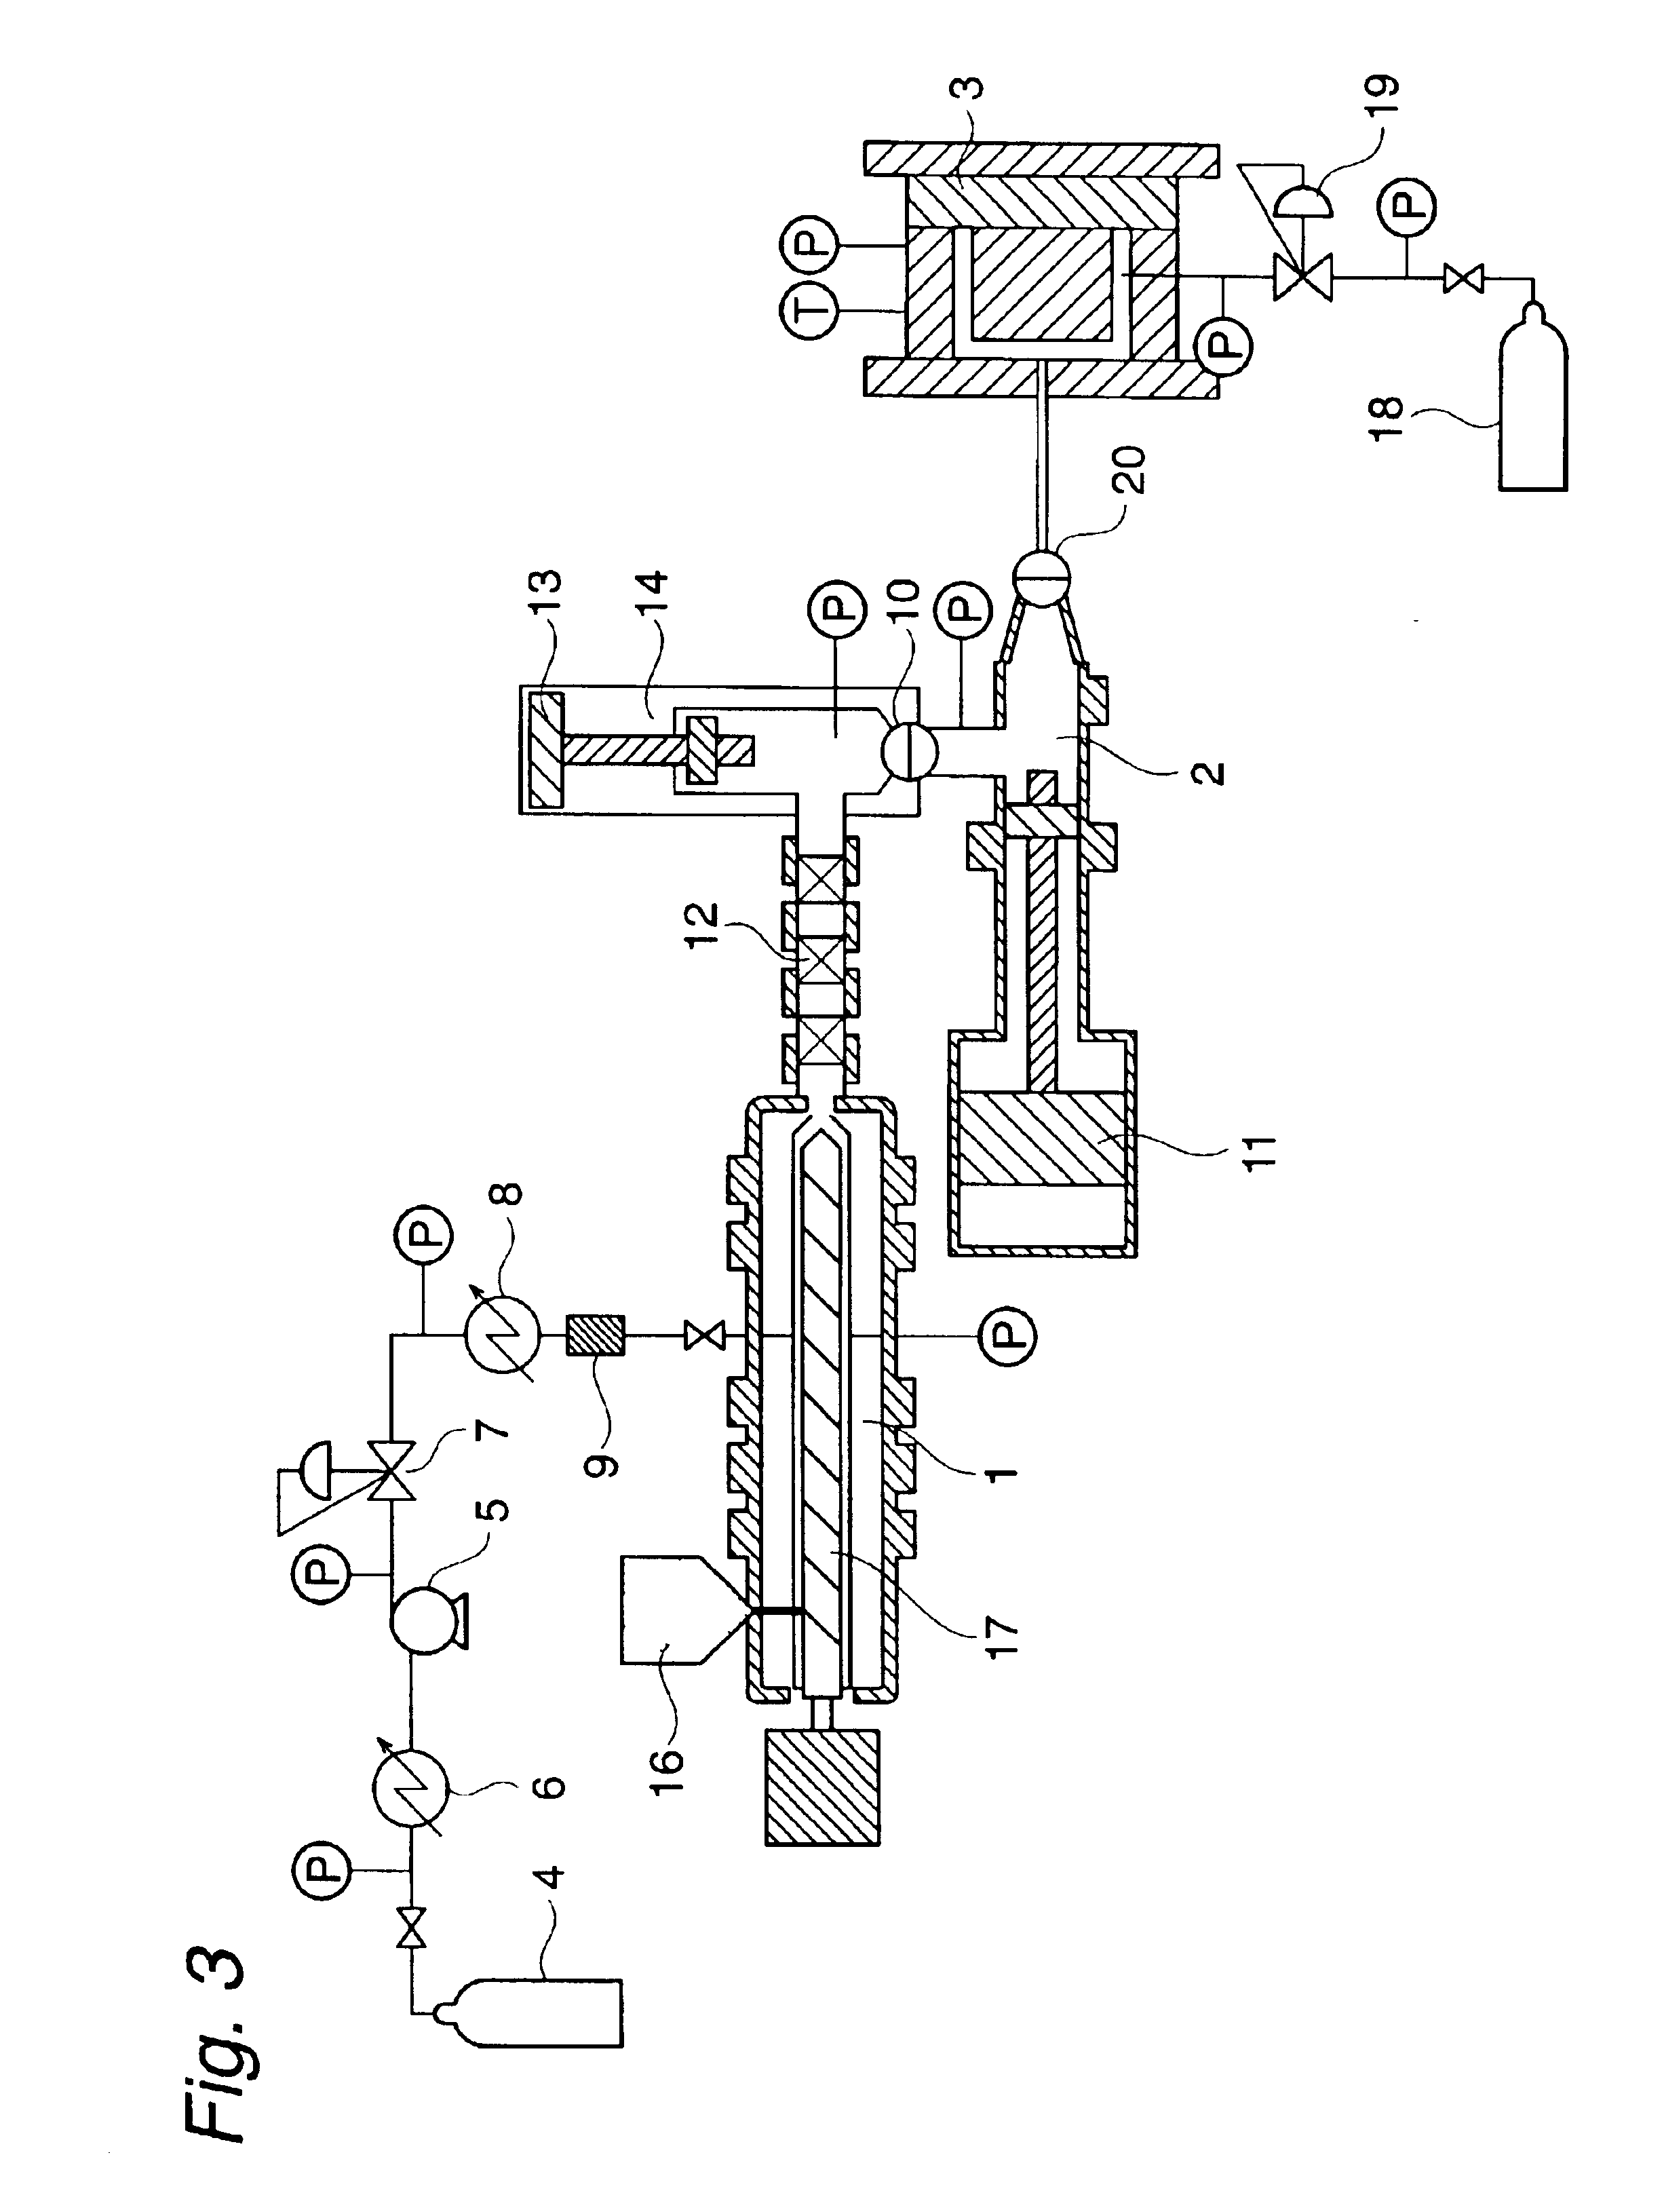 Foam of thermoplastic urethane elastomer composition and process for producing the foam